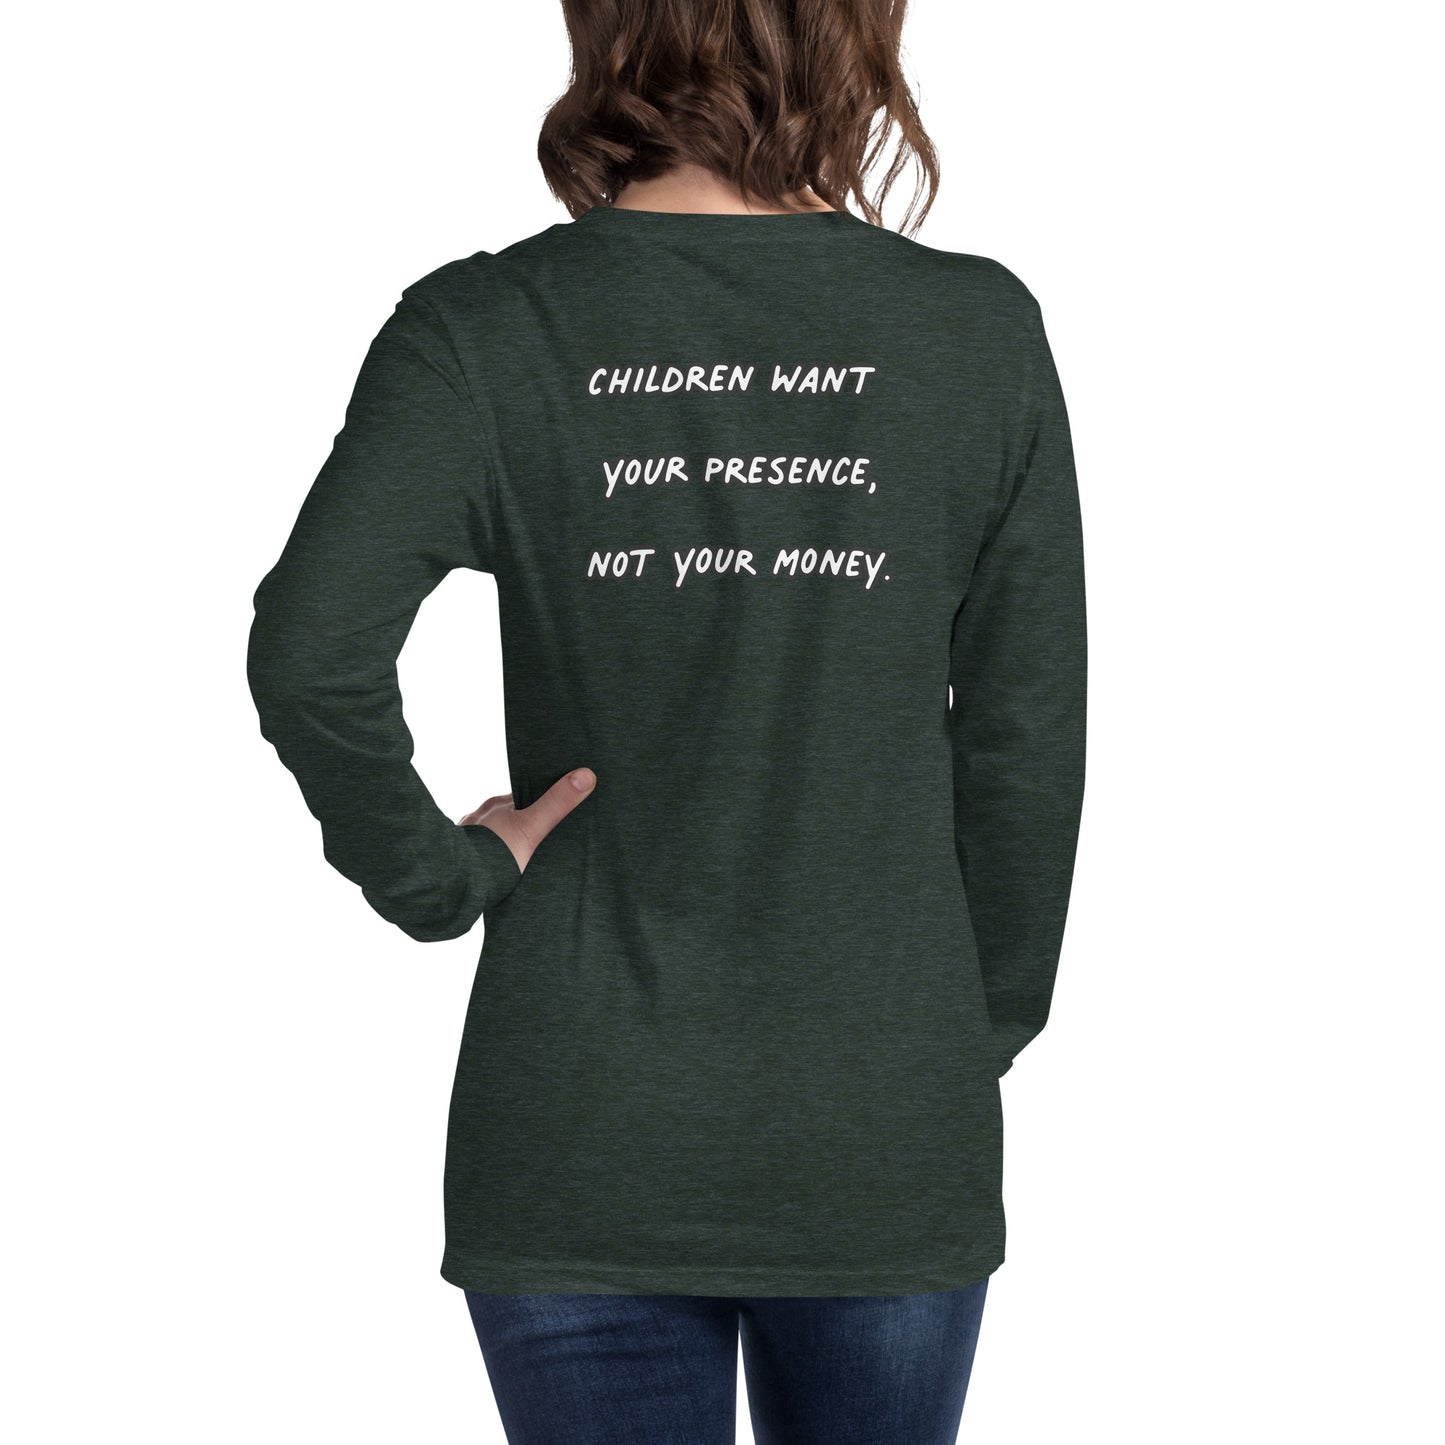 Child Support Does Not Mean Anything To A Child Unisex Long Sleeve T-Shirt